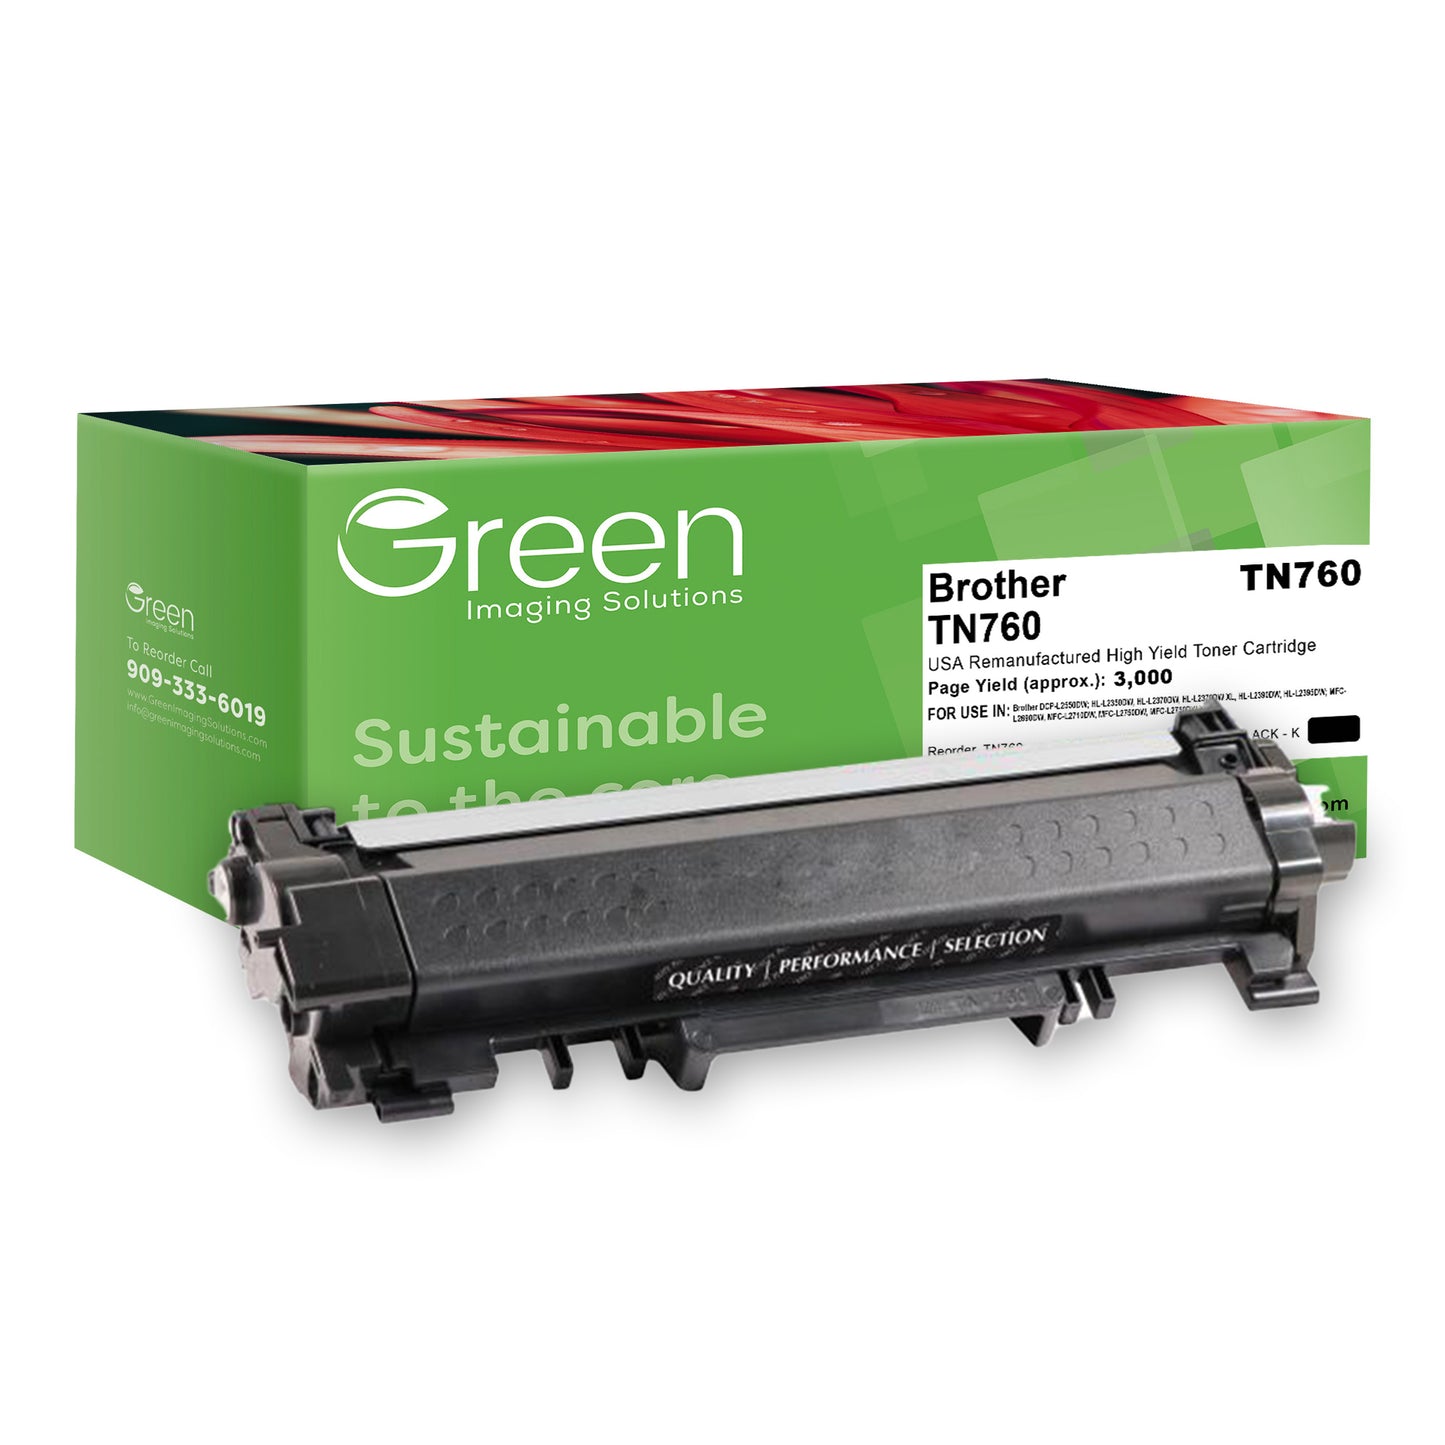 Green Imaging Solutions USA Remanufactured High Yield Toner Cartridge for Brother TN760